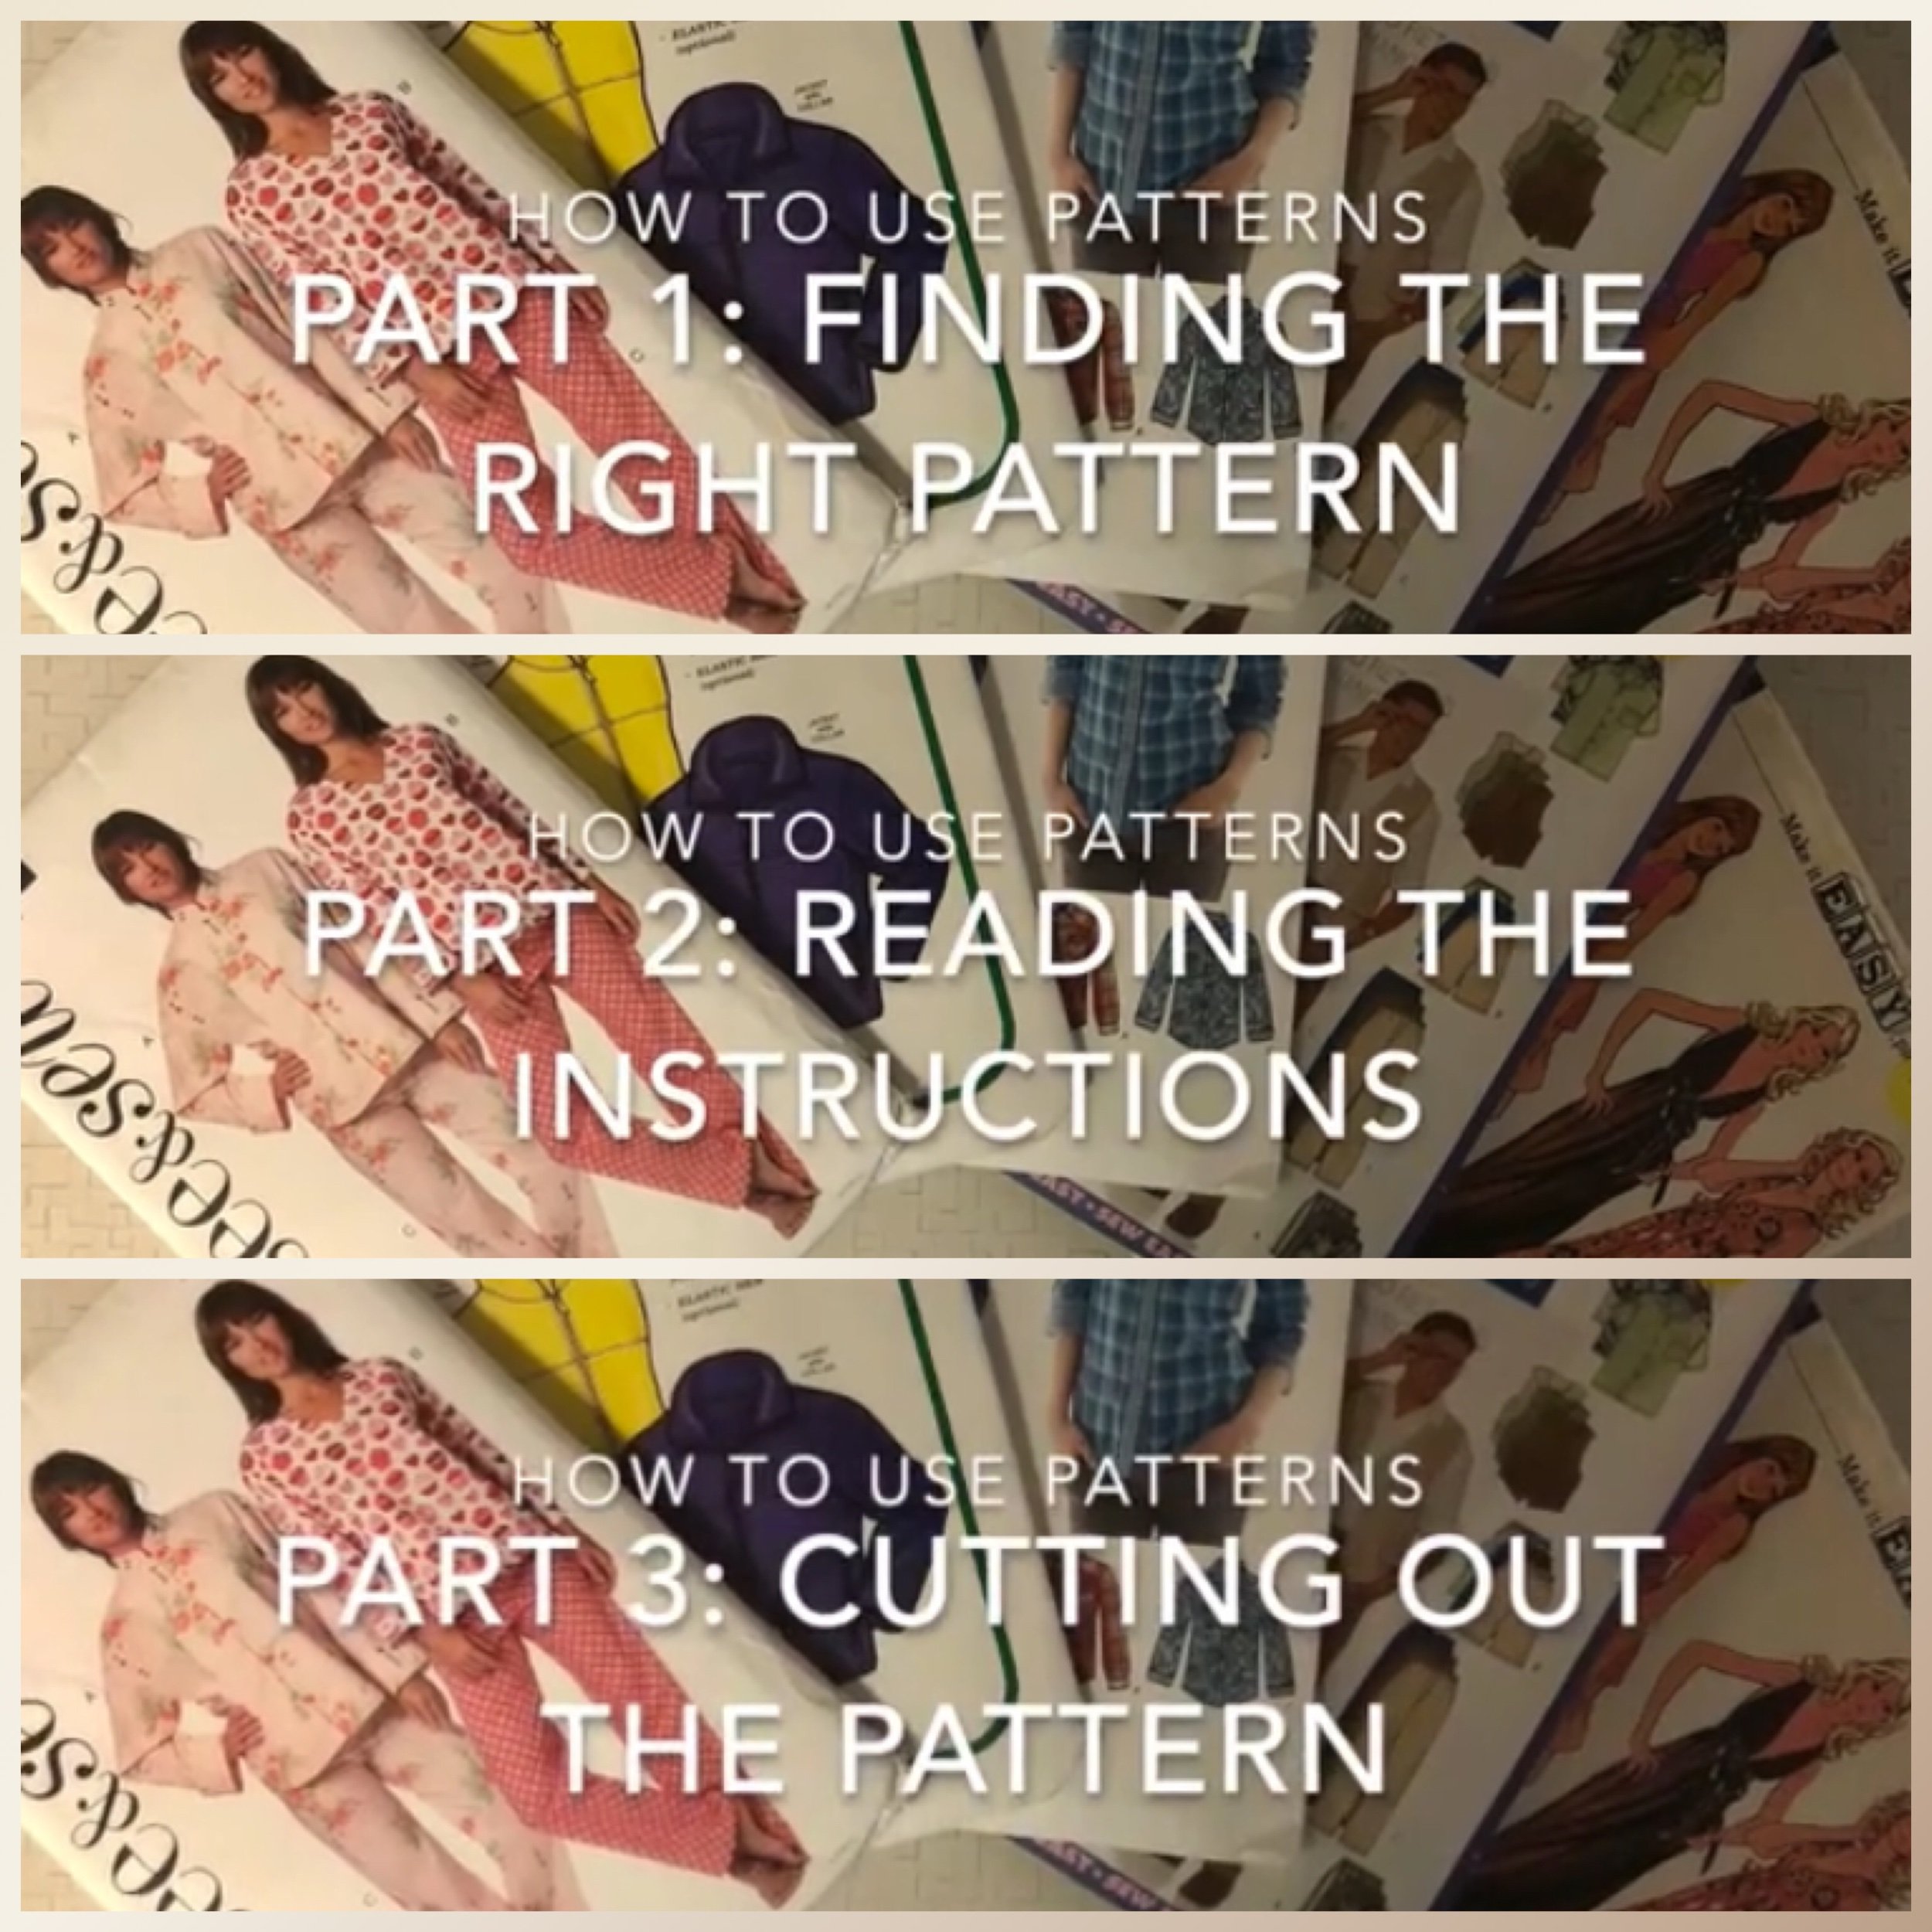 how to use patterns series